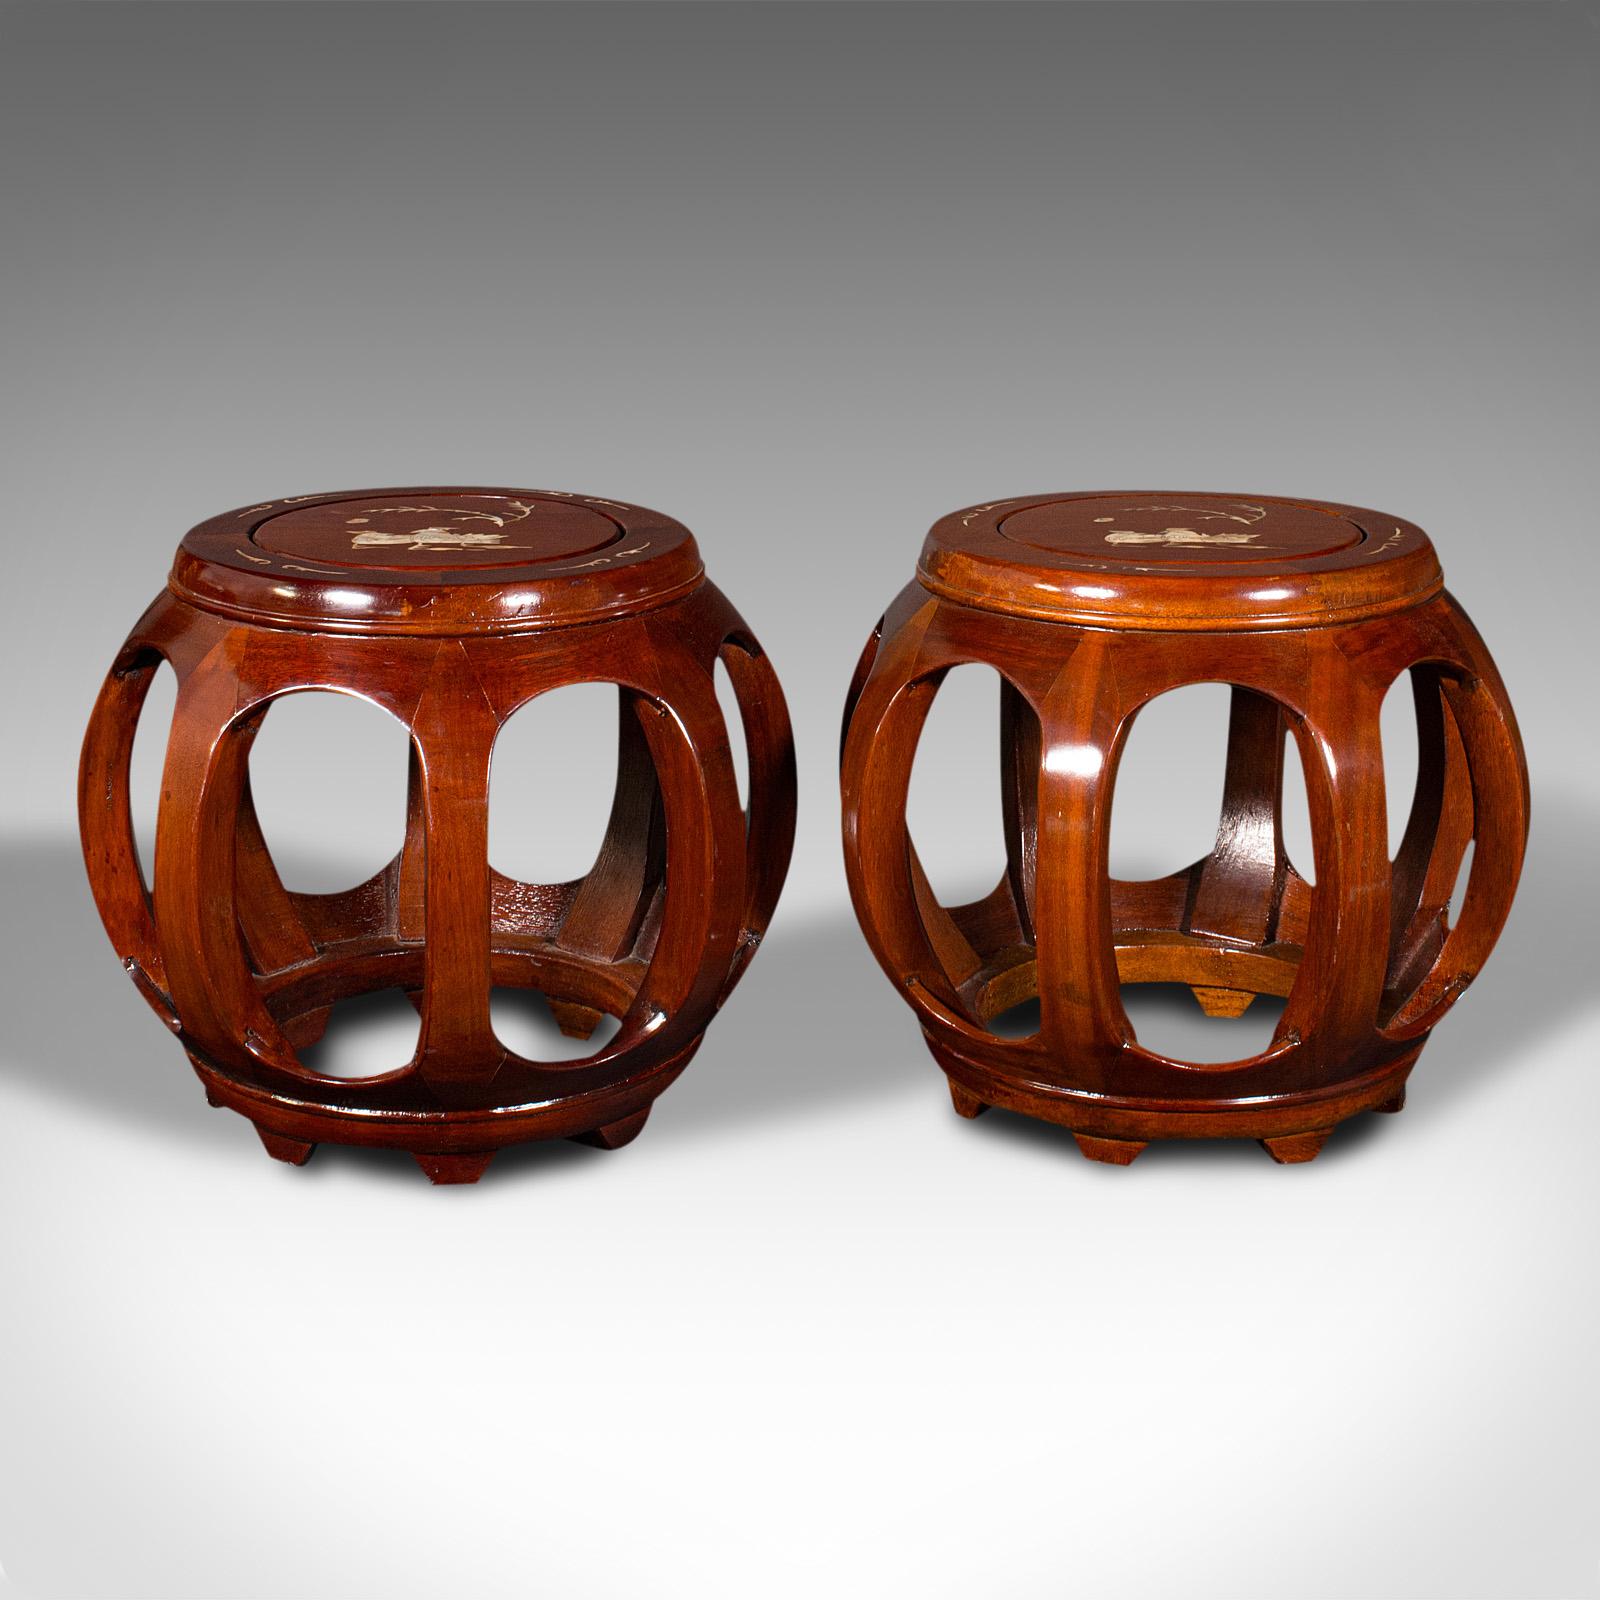 This is a pair of vintage barrel stools. A Chinese, mahogany and mother of pearl inlaid decorative display stand, dating to the late 20th century, circa 1970.

Distinctive accent pieces with great colour and unusual form
Displaying a desirable aged